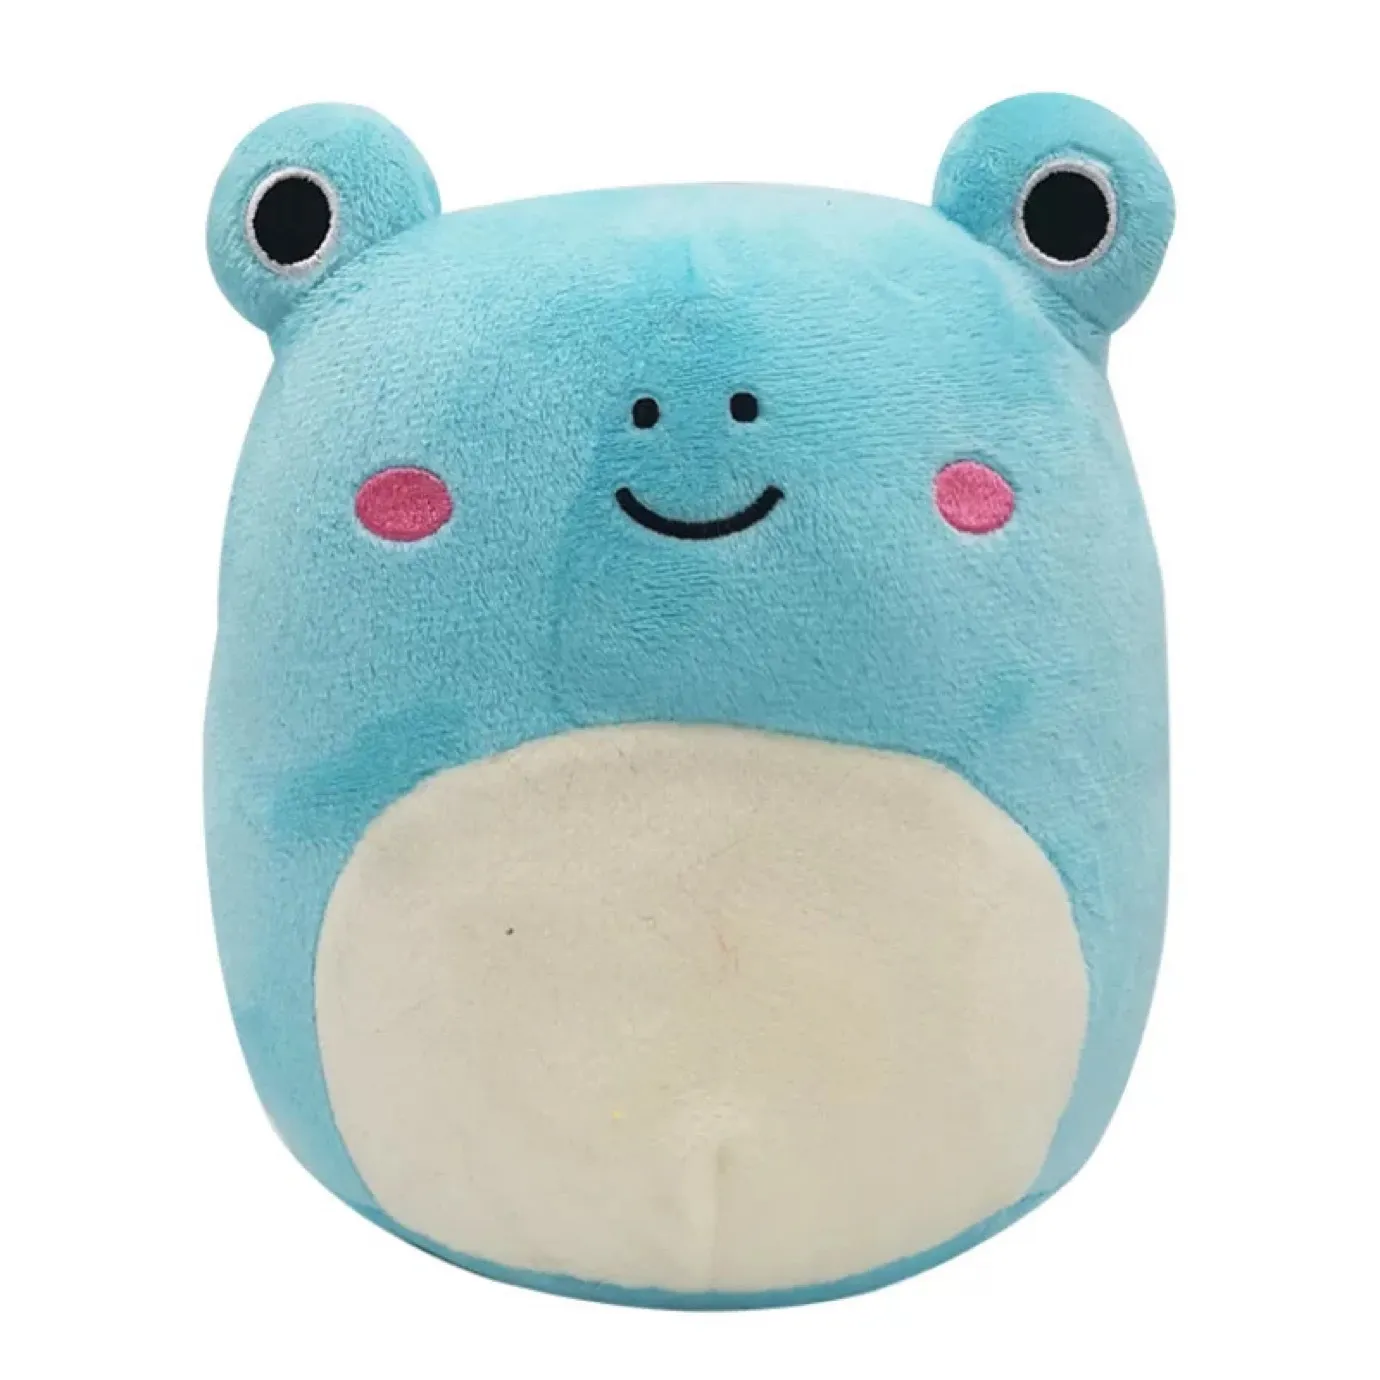 20cm Axolotl Plush Toy 44 Styles Kawaii Cows Dinosaur Frog Stuffed Animals  Plushie Baby Toys Soft Pillow Children Gift From Smyy7, $4.03